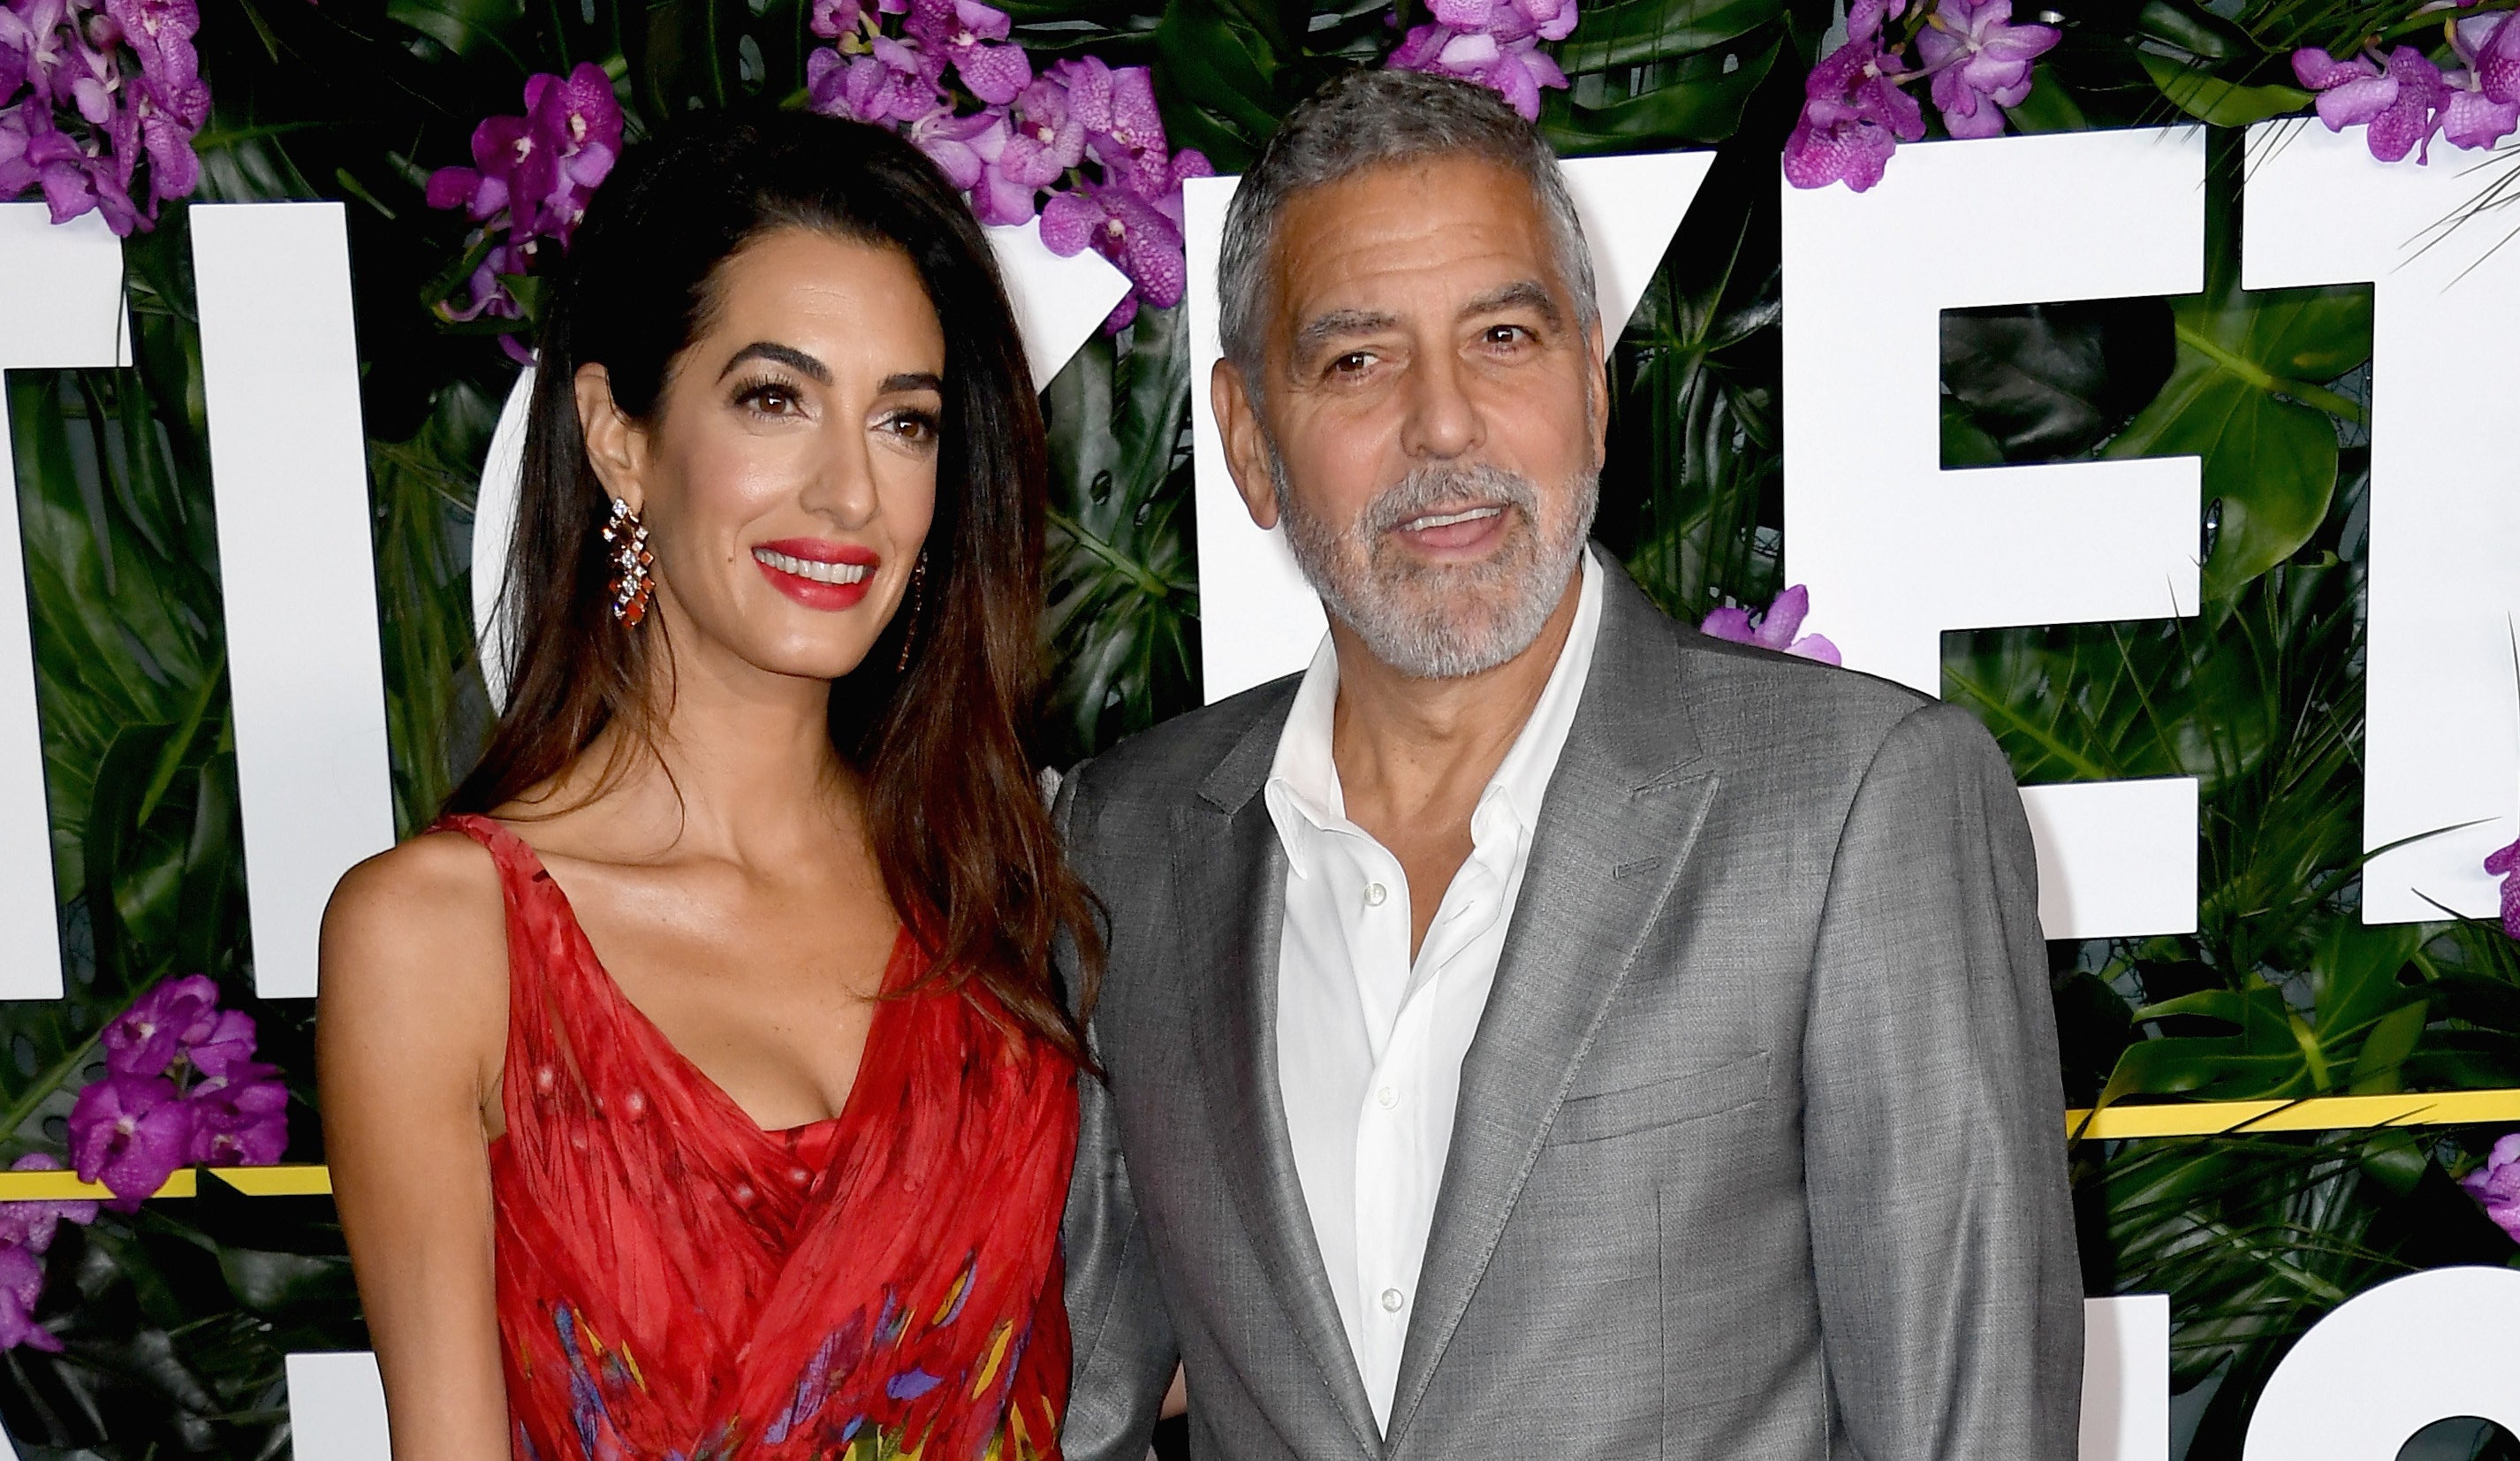 George Clooney and wife Amal at a red carpet event